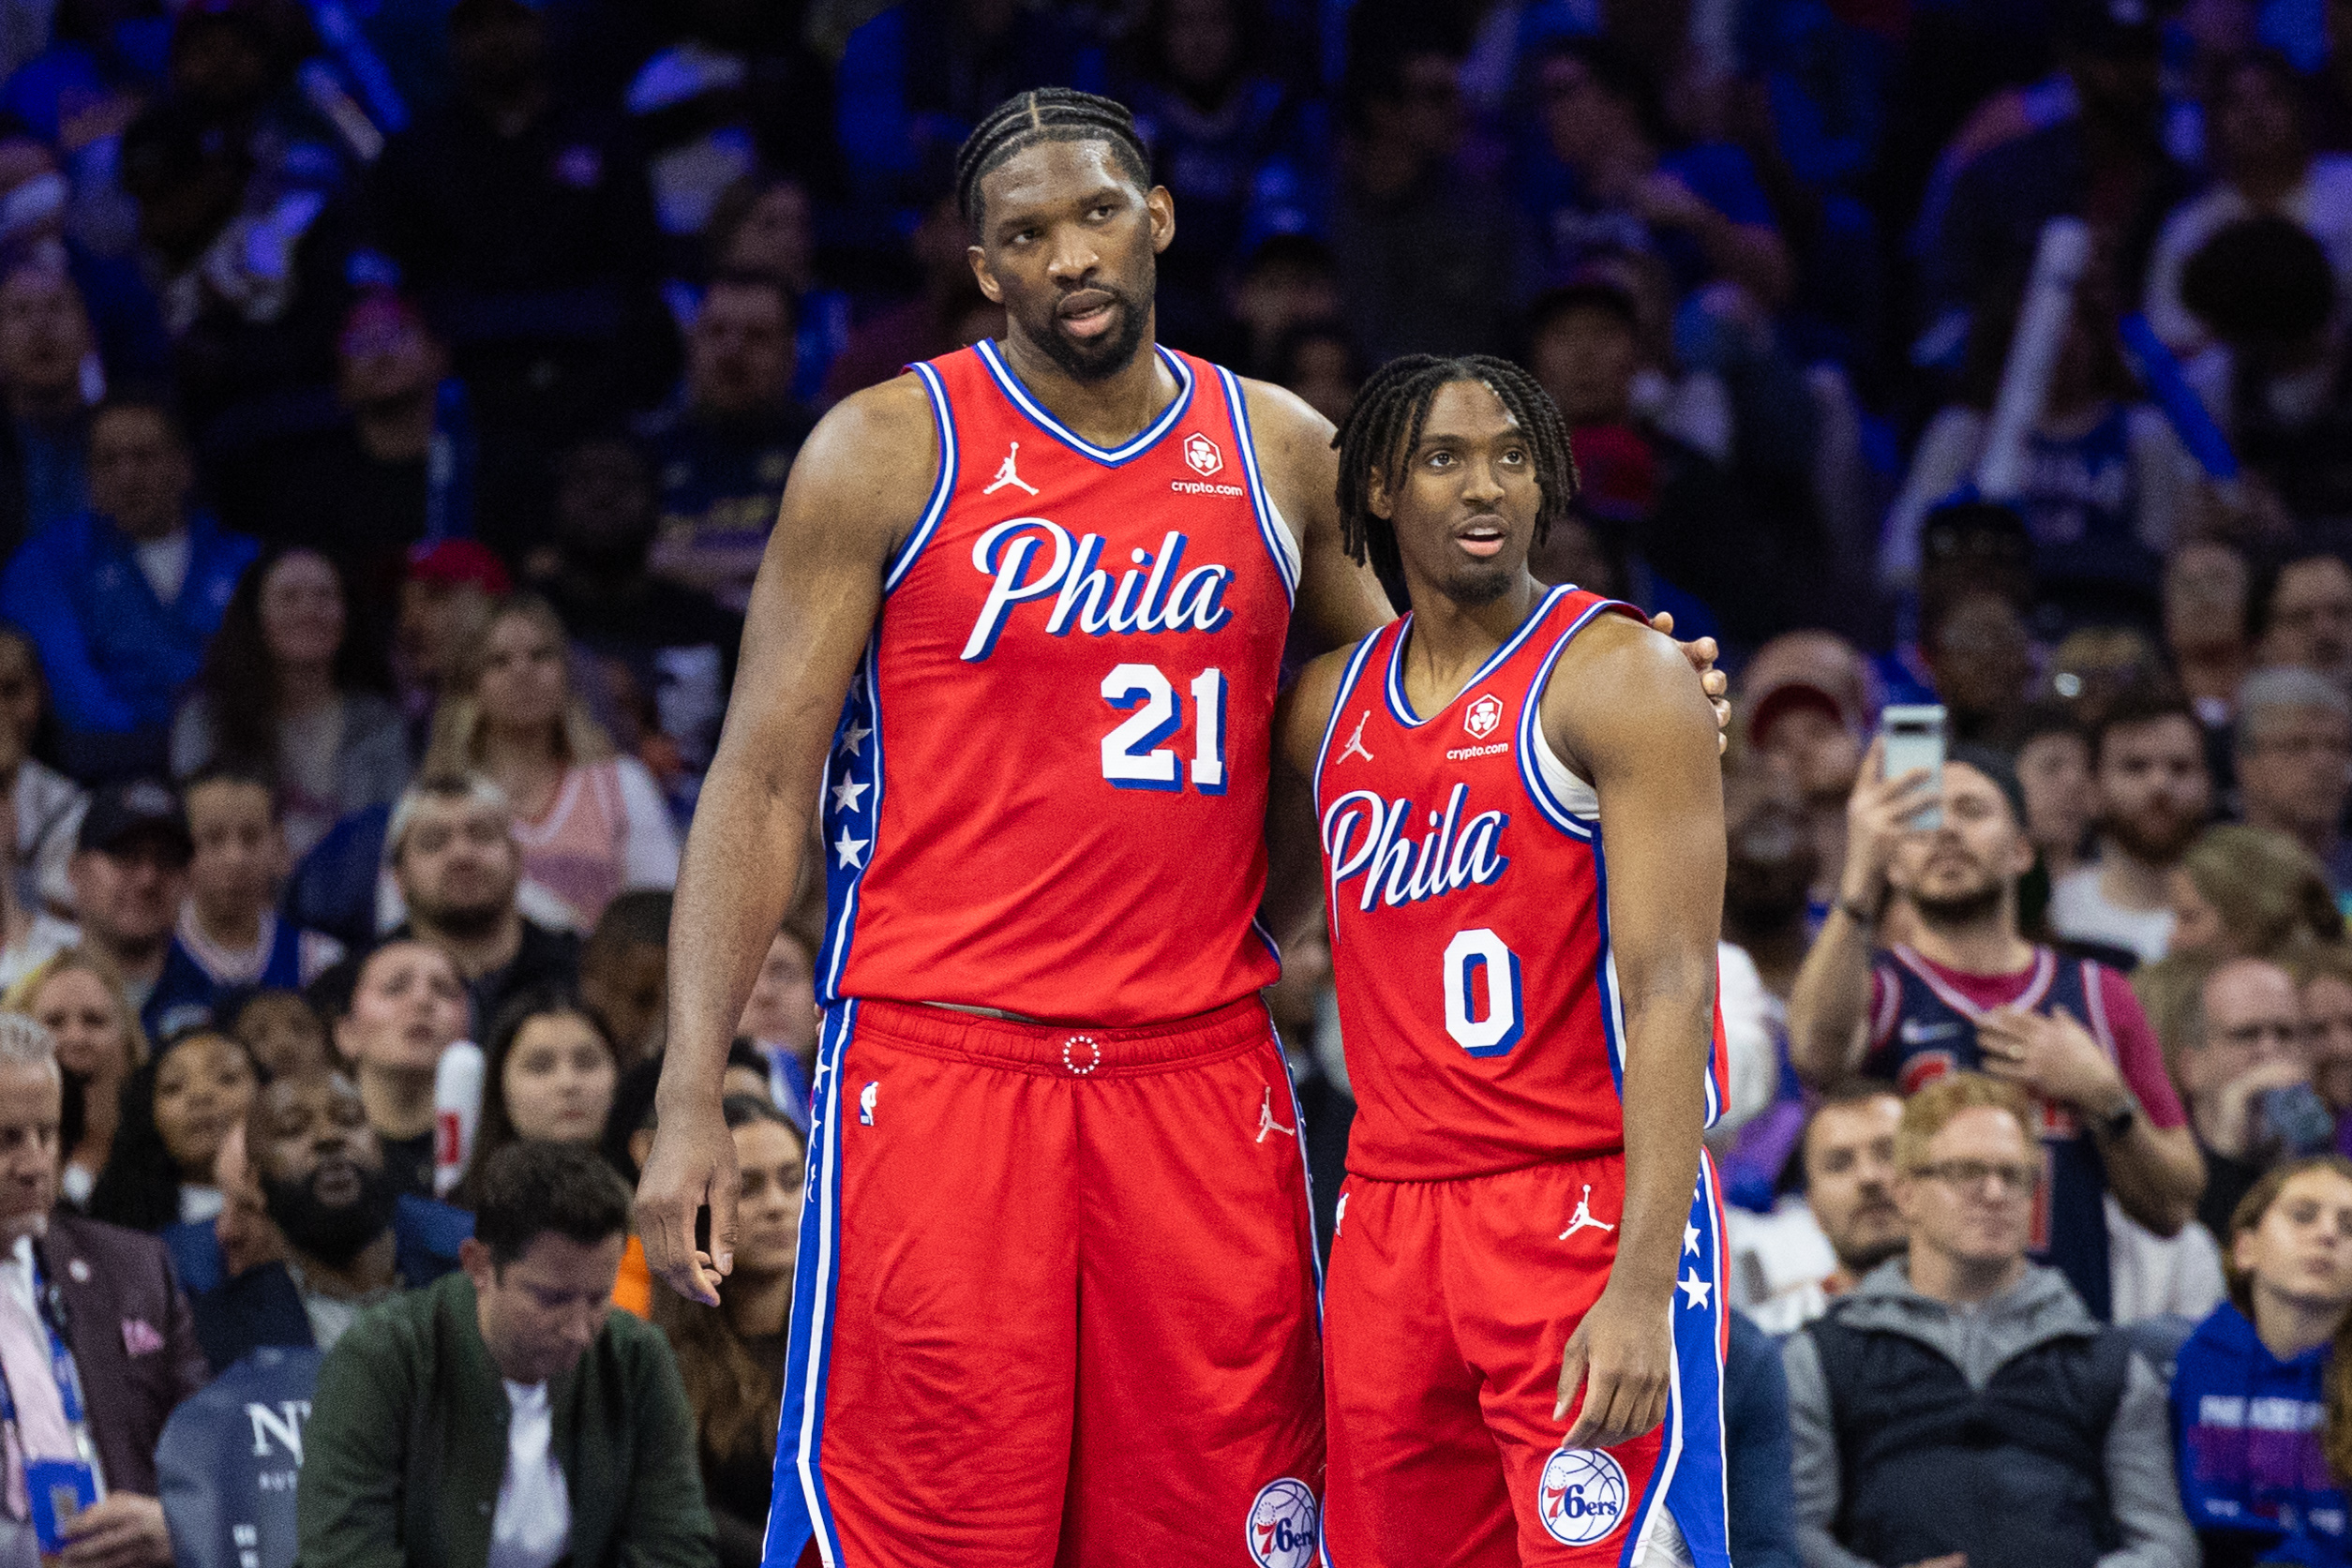 Apr 12, 2024; Philadelphia, Pennsylvania, USA; Philadelphia 76ers center Joel Embiid (21) and guard Tyrese Maxey (0) stand together during a break in action in the fourth quarter against the Orlando Magic at Wells Fargo Center. Mandatory Credit: Bill Streicher-USA TODAY Sports